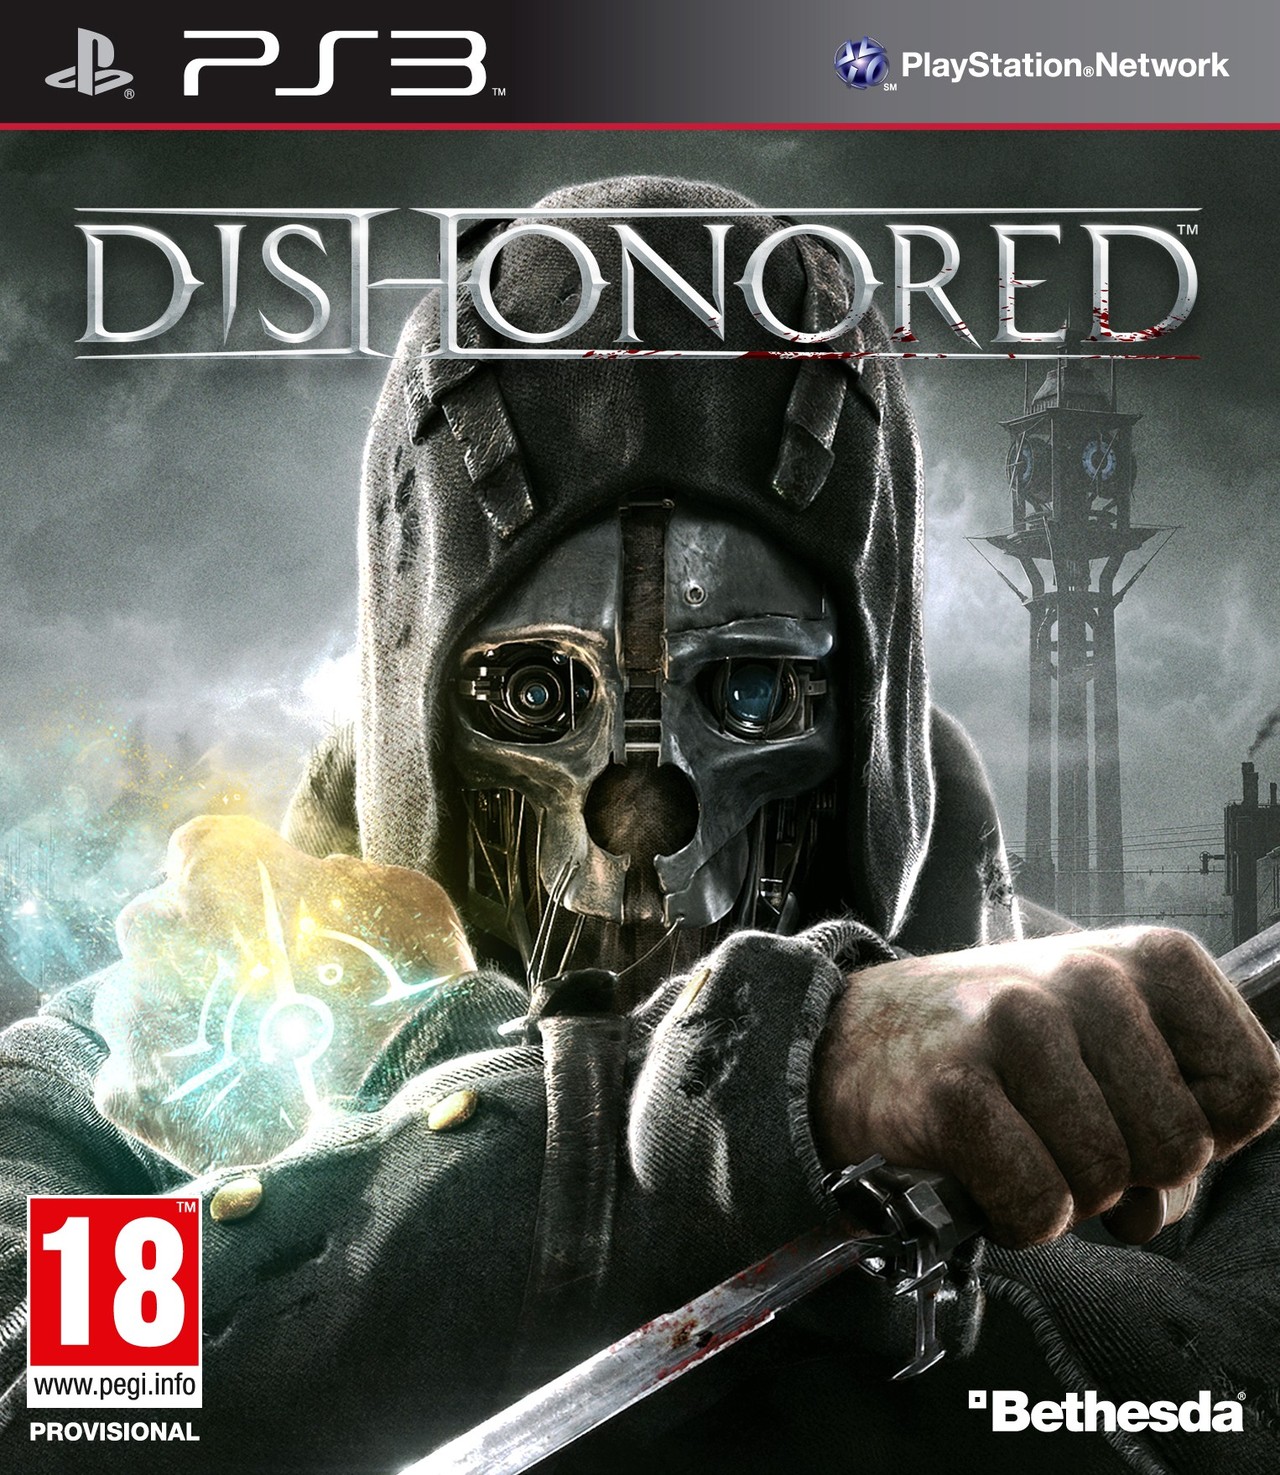 http://image.jeuxvideo.com/images/jaquettes/00041409/jaquette-dishonored-playstation-3-ps3-cover-avant-g-1336660359.jpg